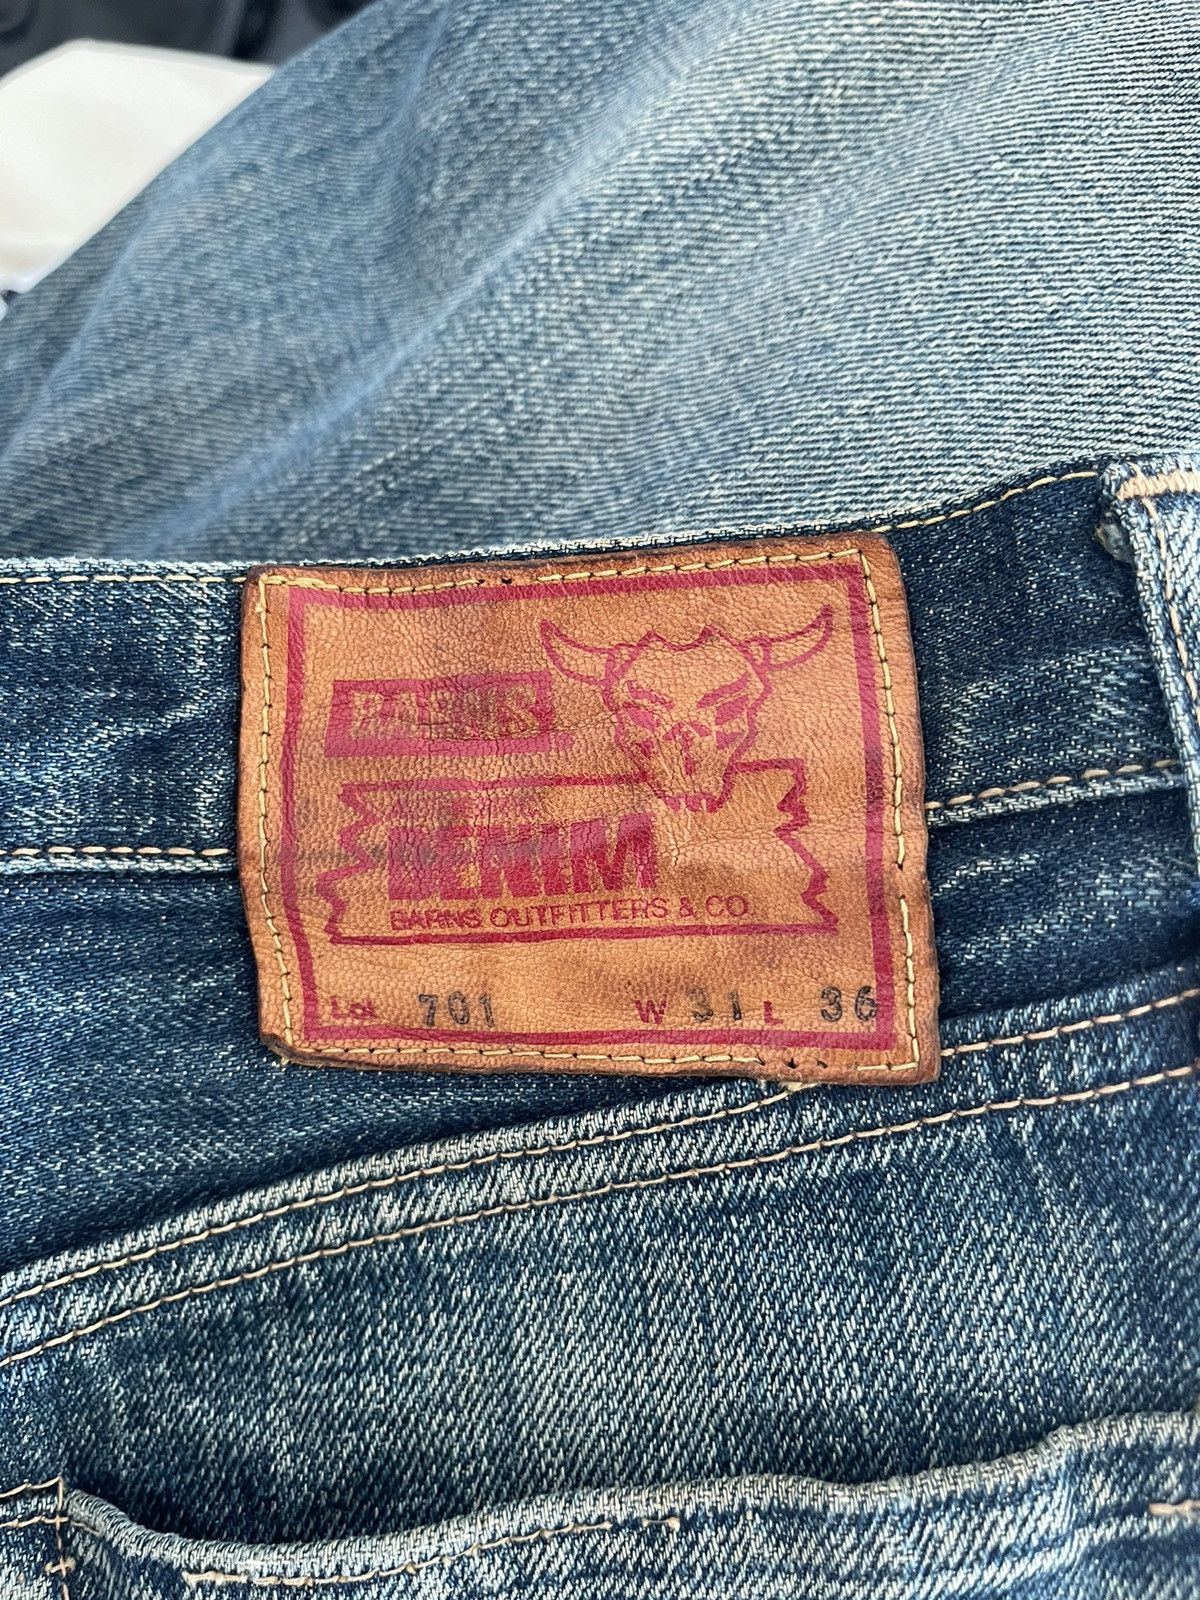 Japanese Brand - JAPANESE REPRO DENIM JEANS, BARNS OUTFITTERS & CO BRAND - 3